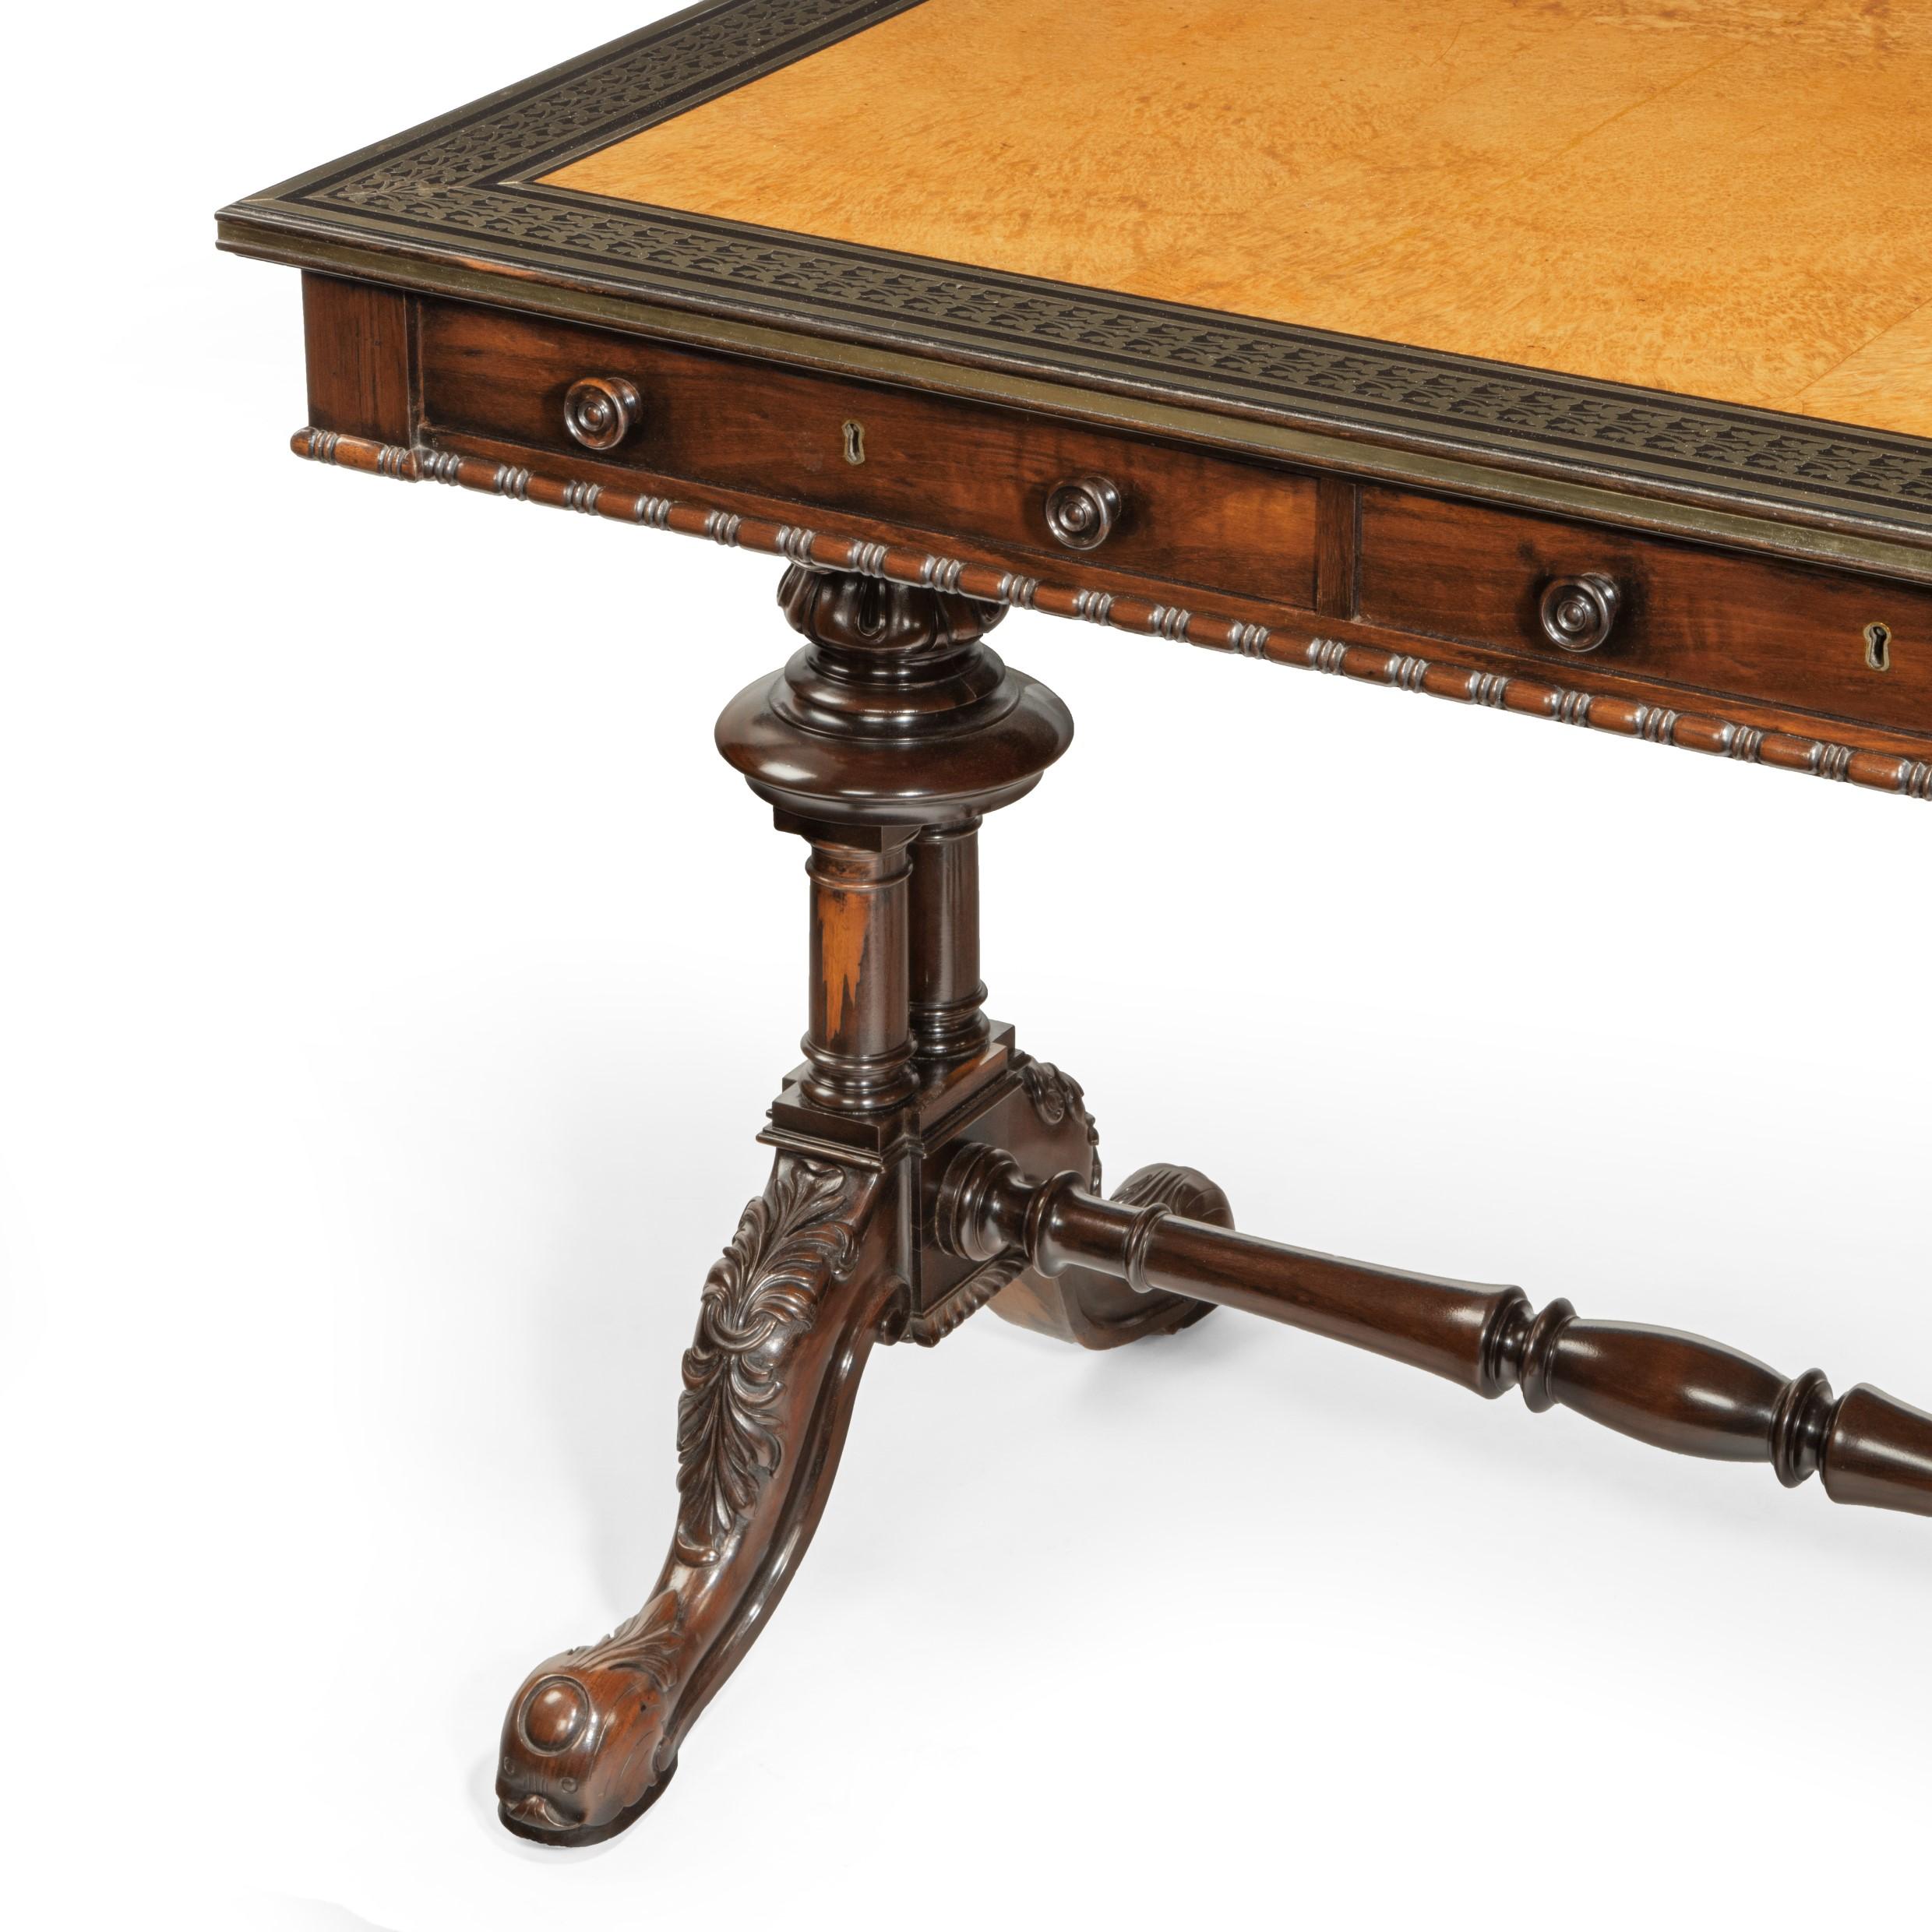 Brass Striking Goncalo Alves 'Albuera Wood' Writing Table Attributed to Gillows For Sale